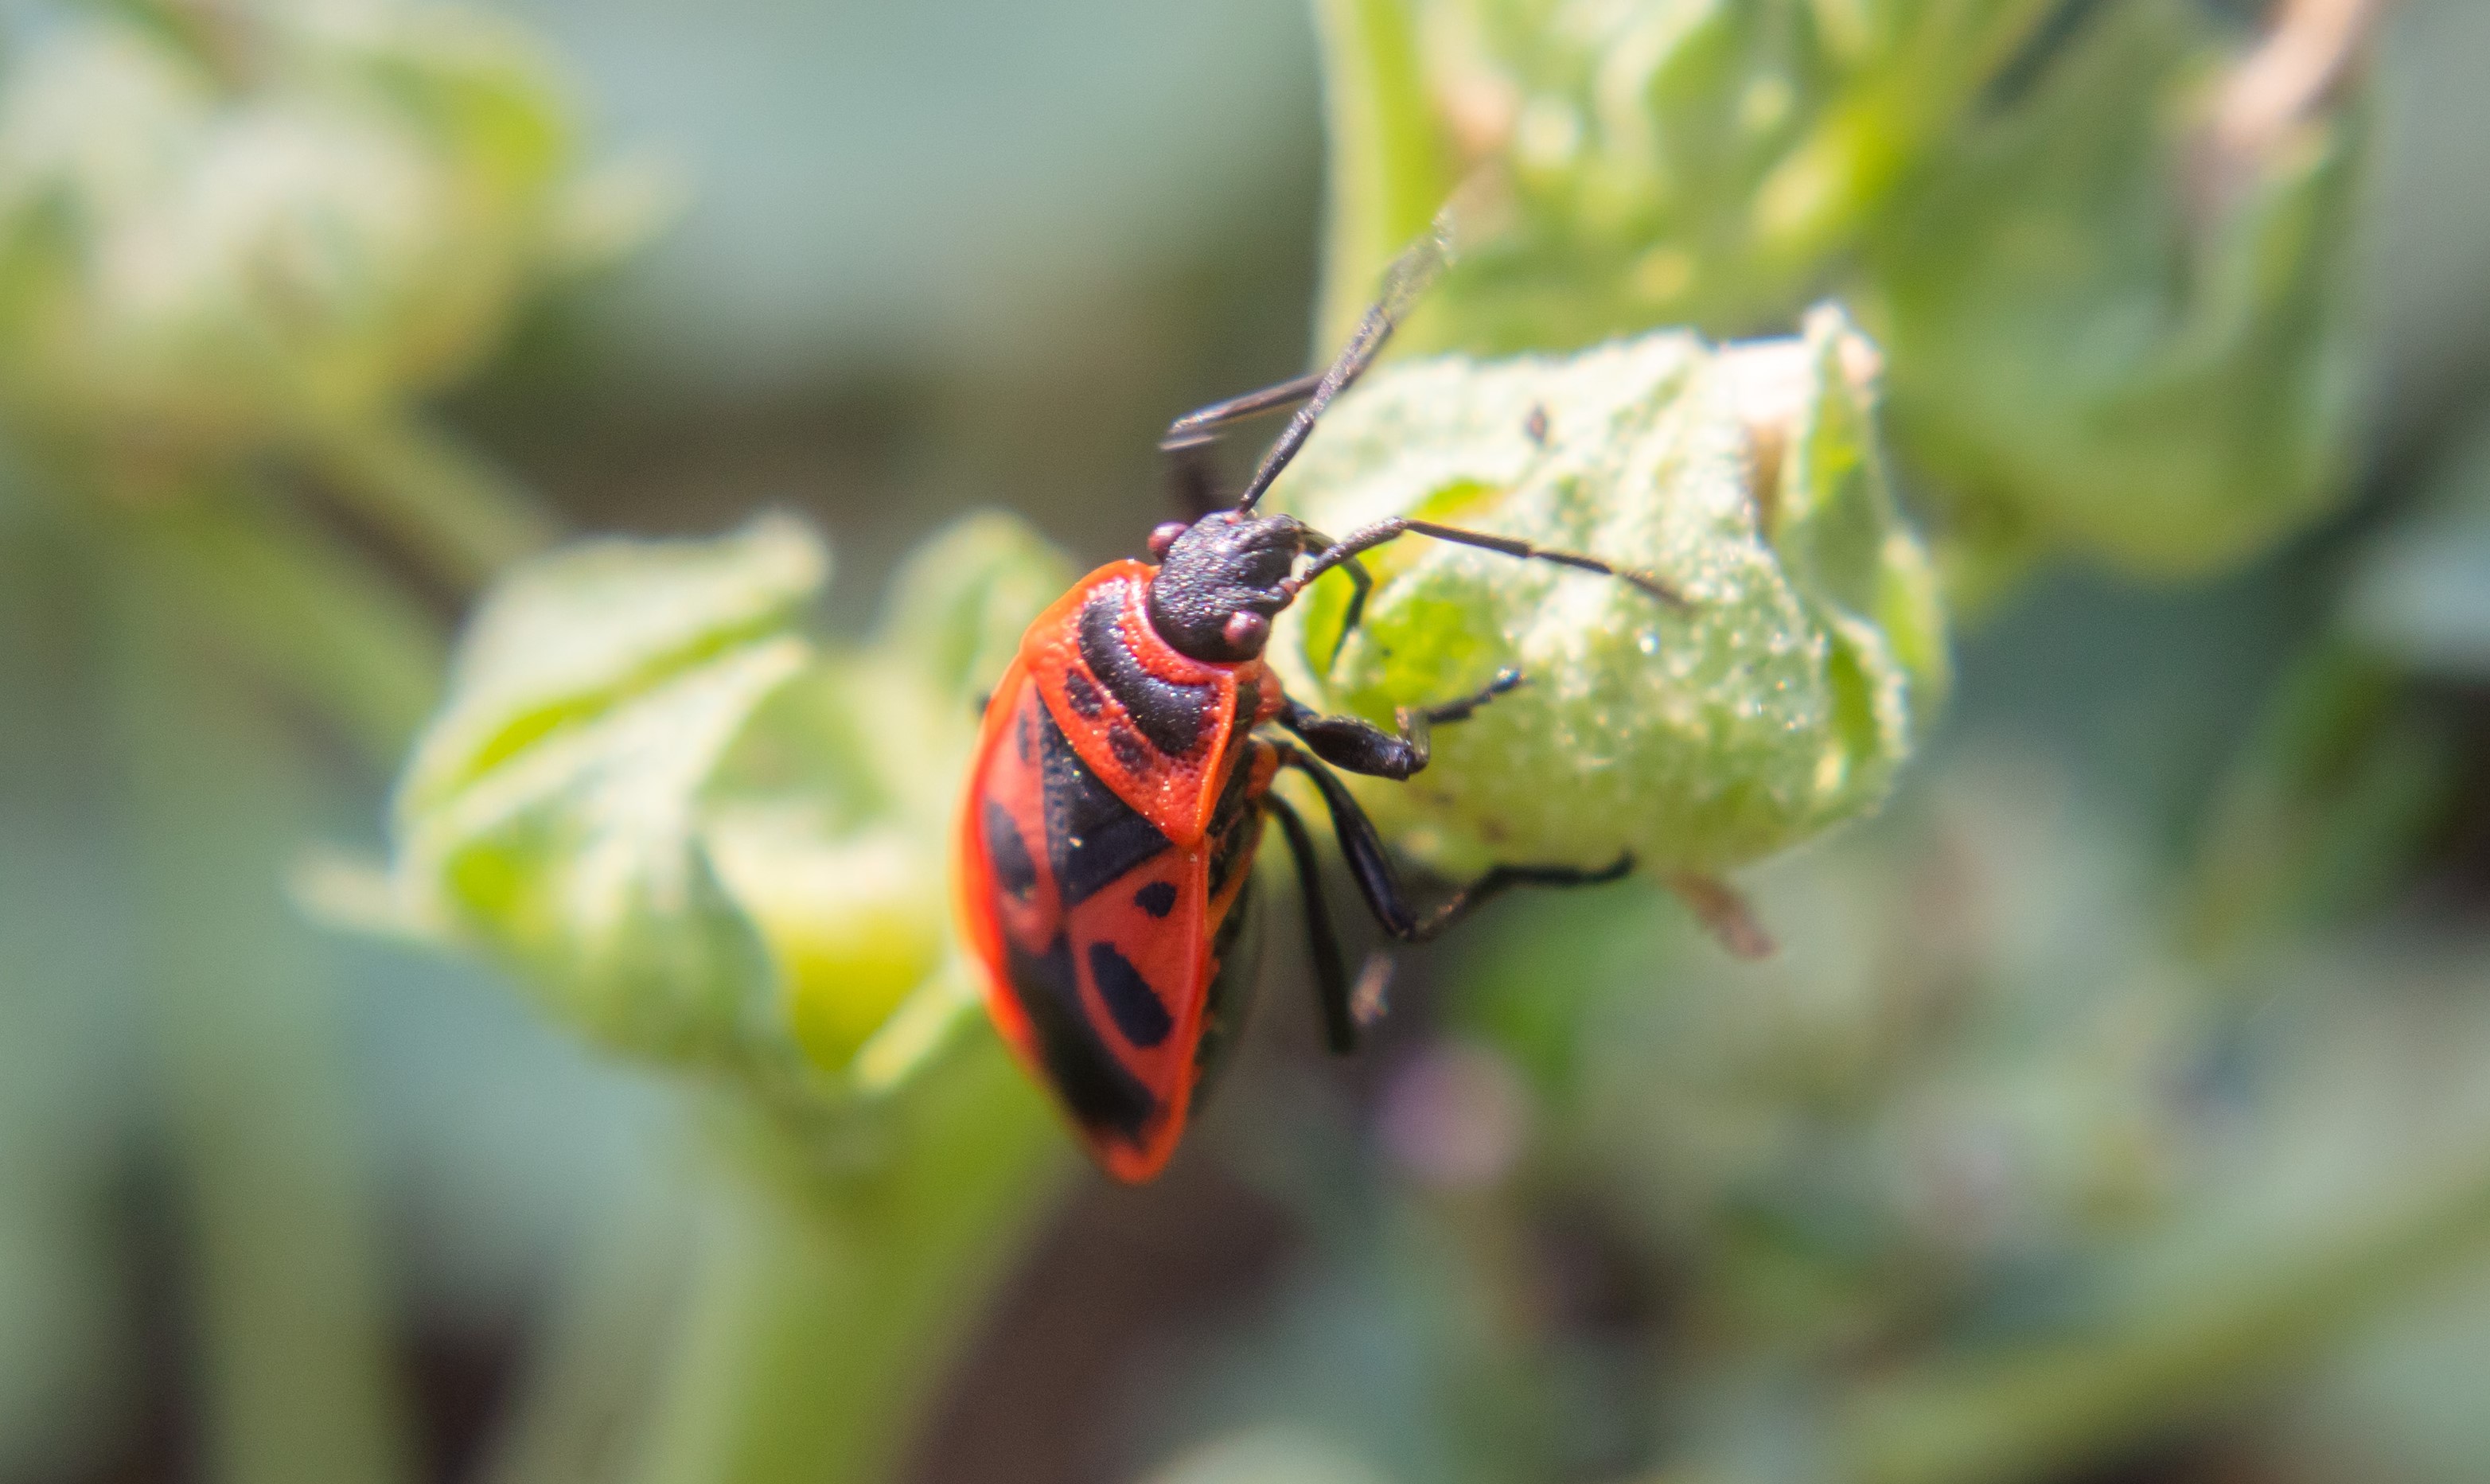 Fig. 4. Red firebug adult feeding on a common mallow plant (Malva neglecta) using their stylet mouthpart.